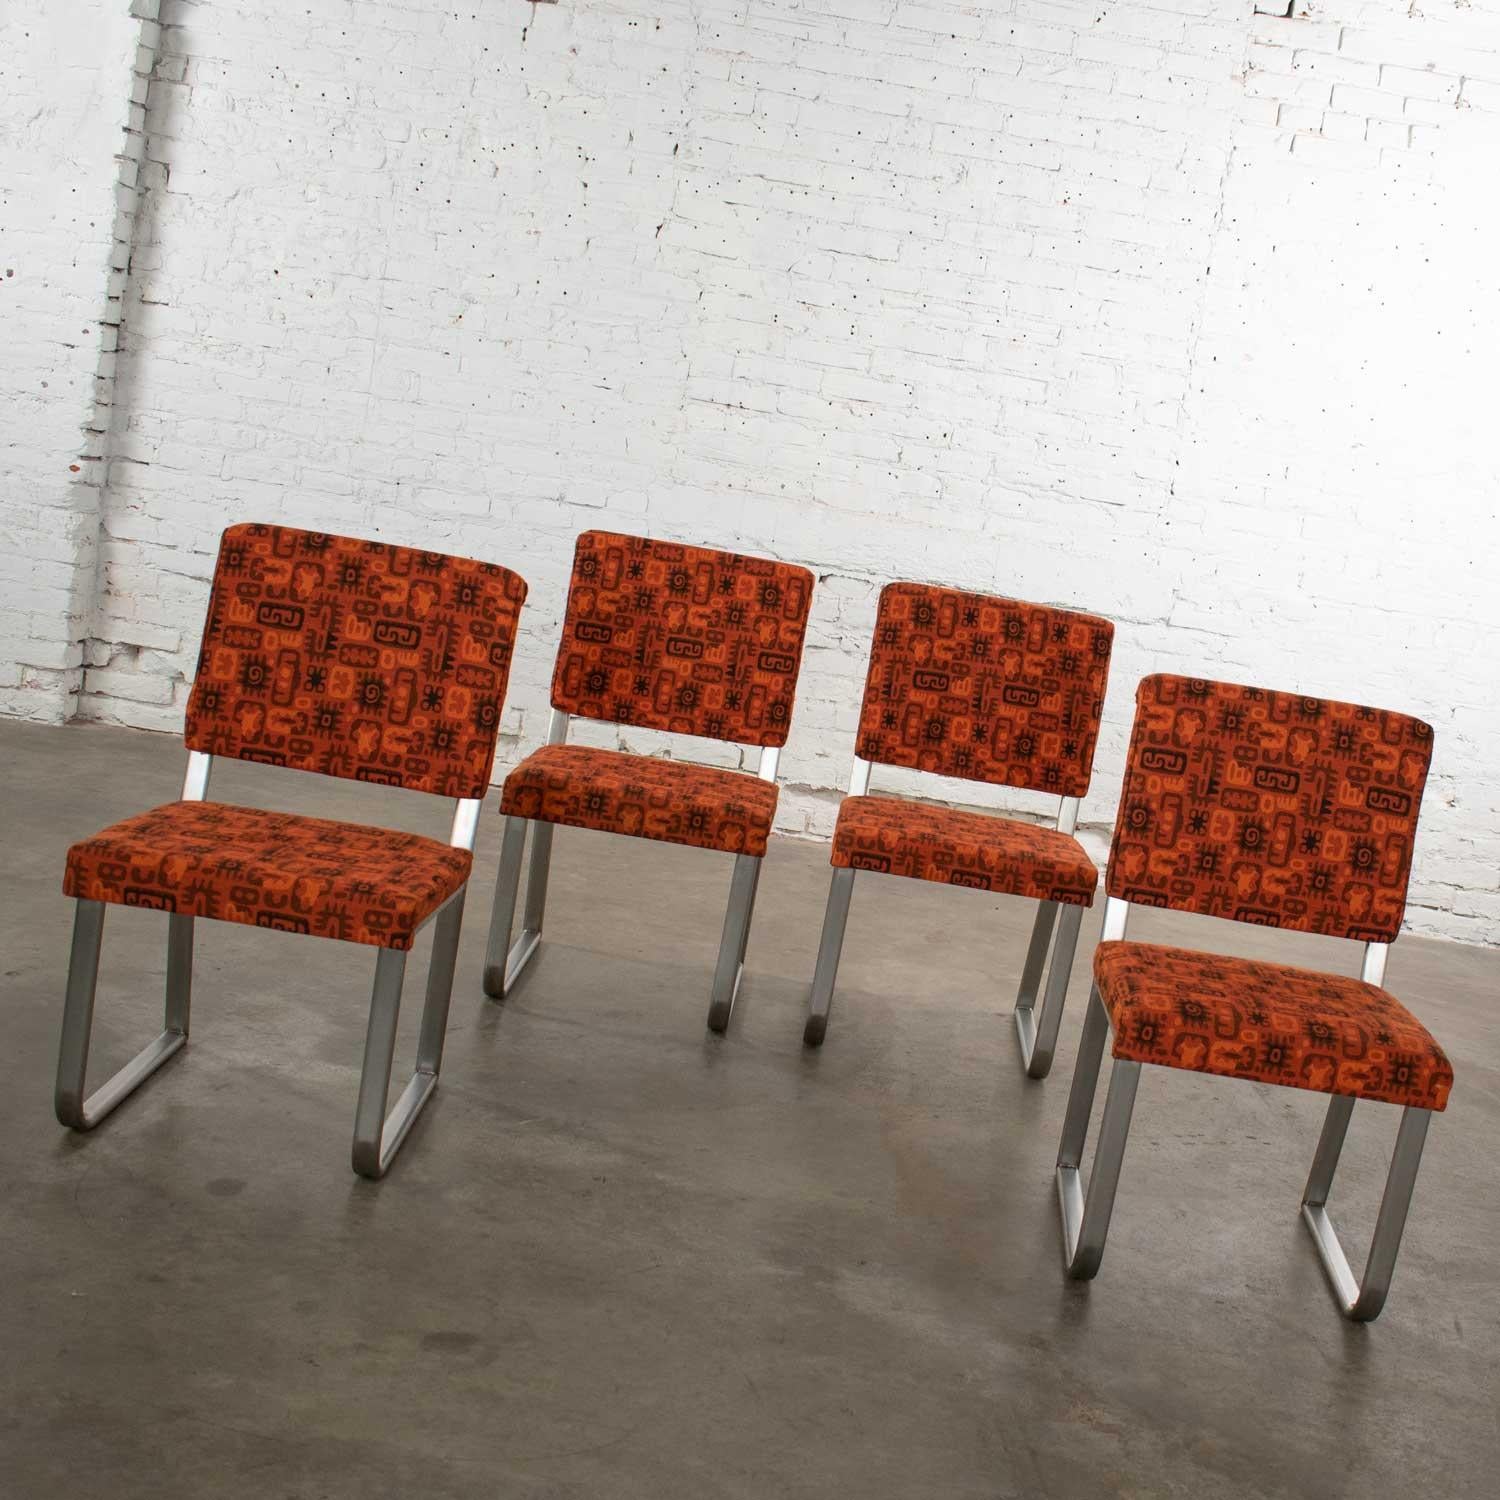 20th Century 4 Streamline Modern Railroad Dining Car Chairs Stainless Steel and Orange Fabric For Sale